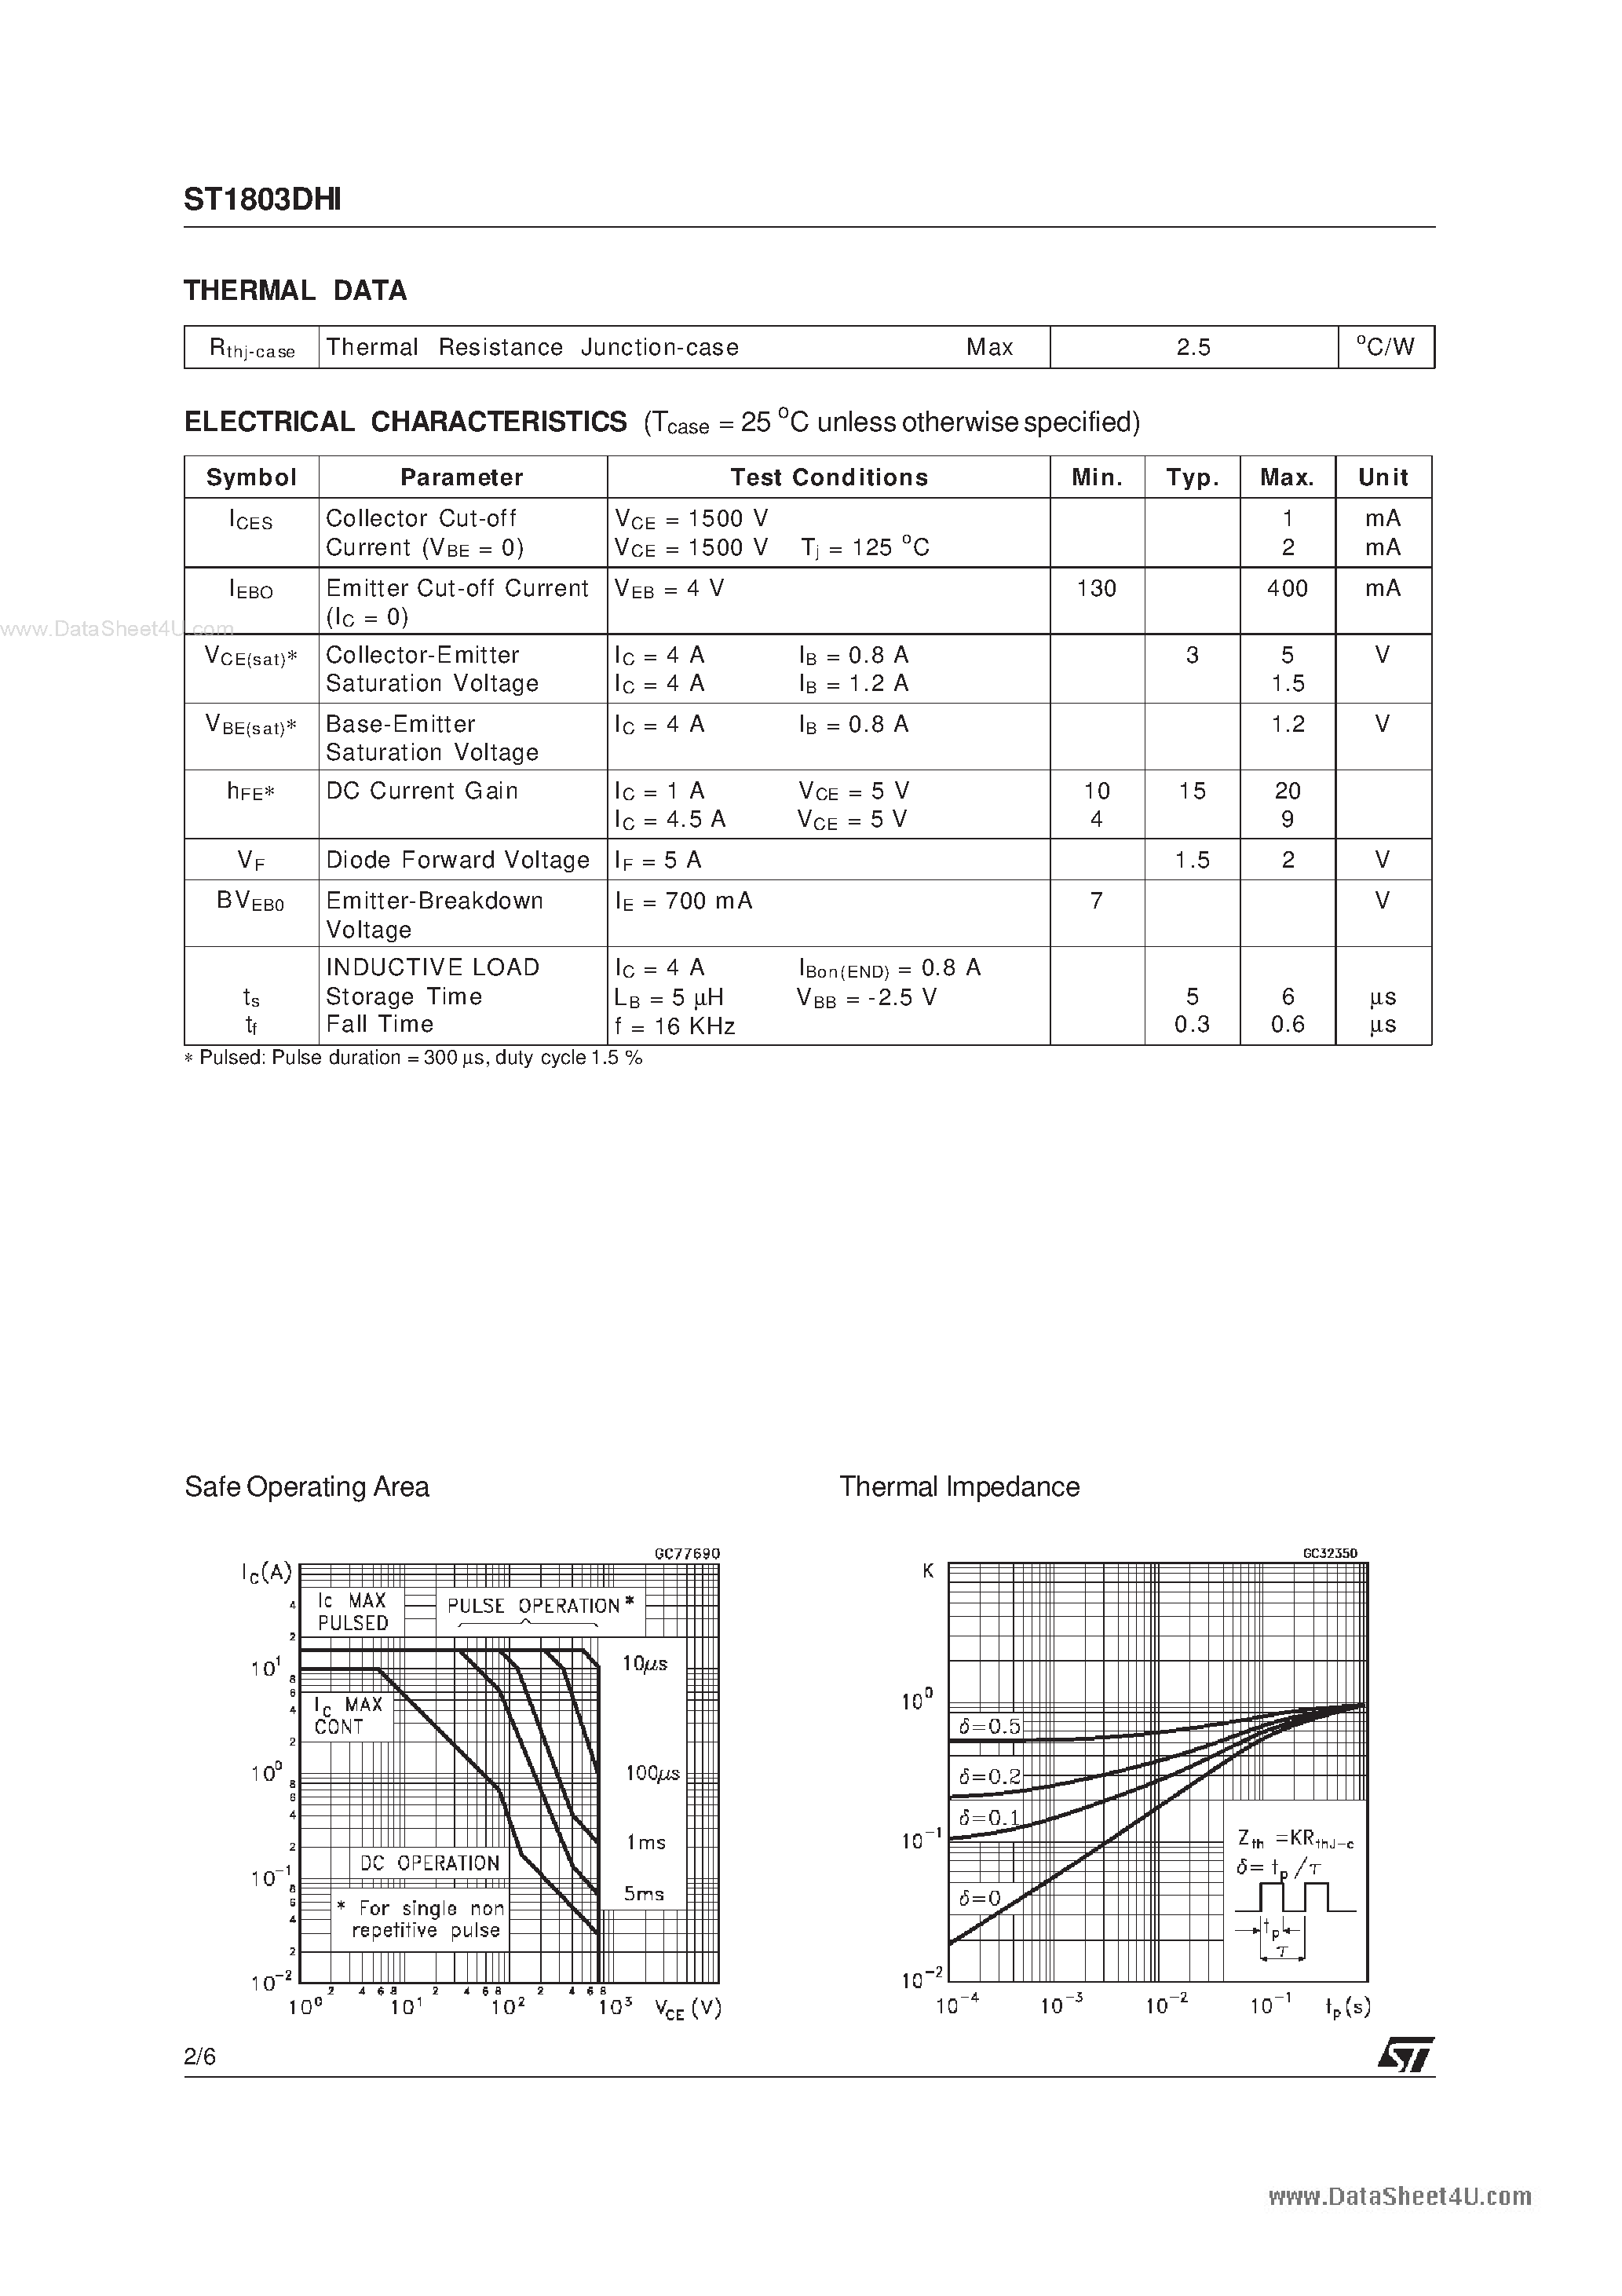 Datasheet 1803DHI - Search -----> ST1803DHI page 2